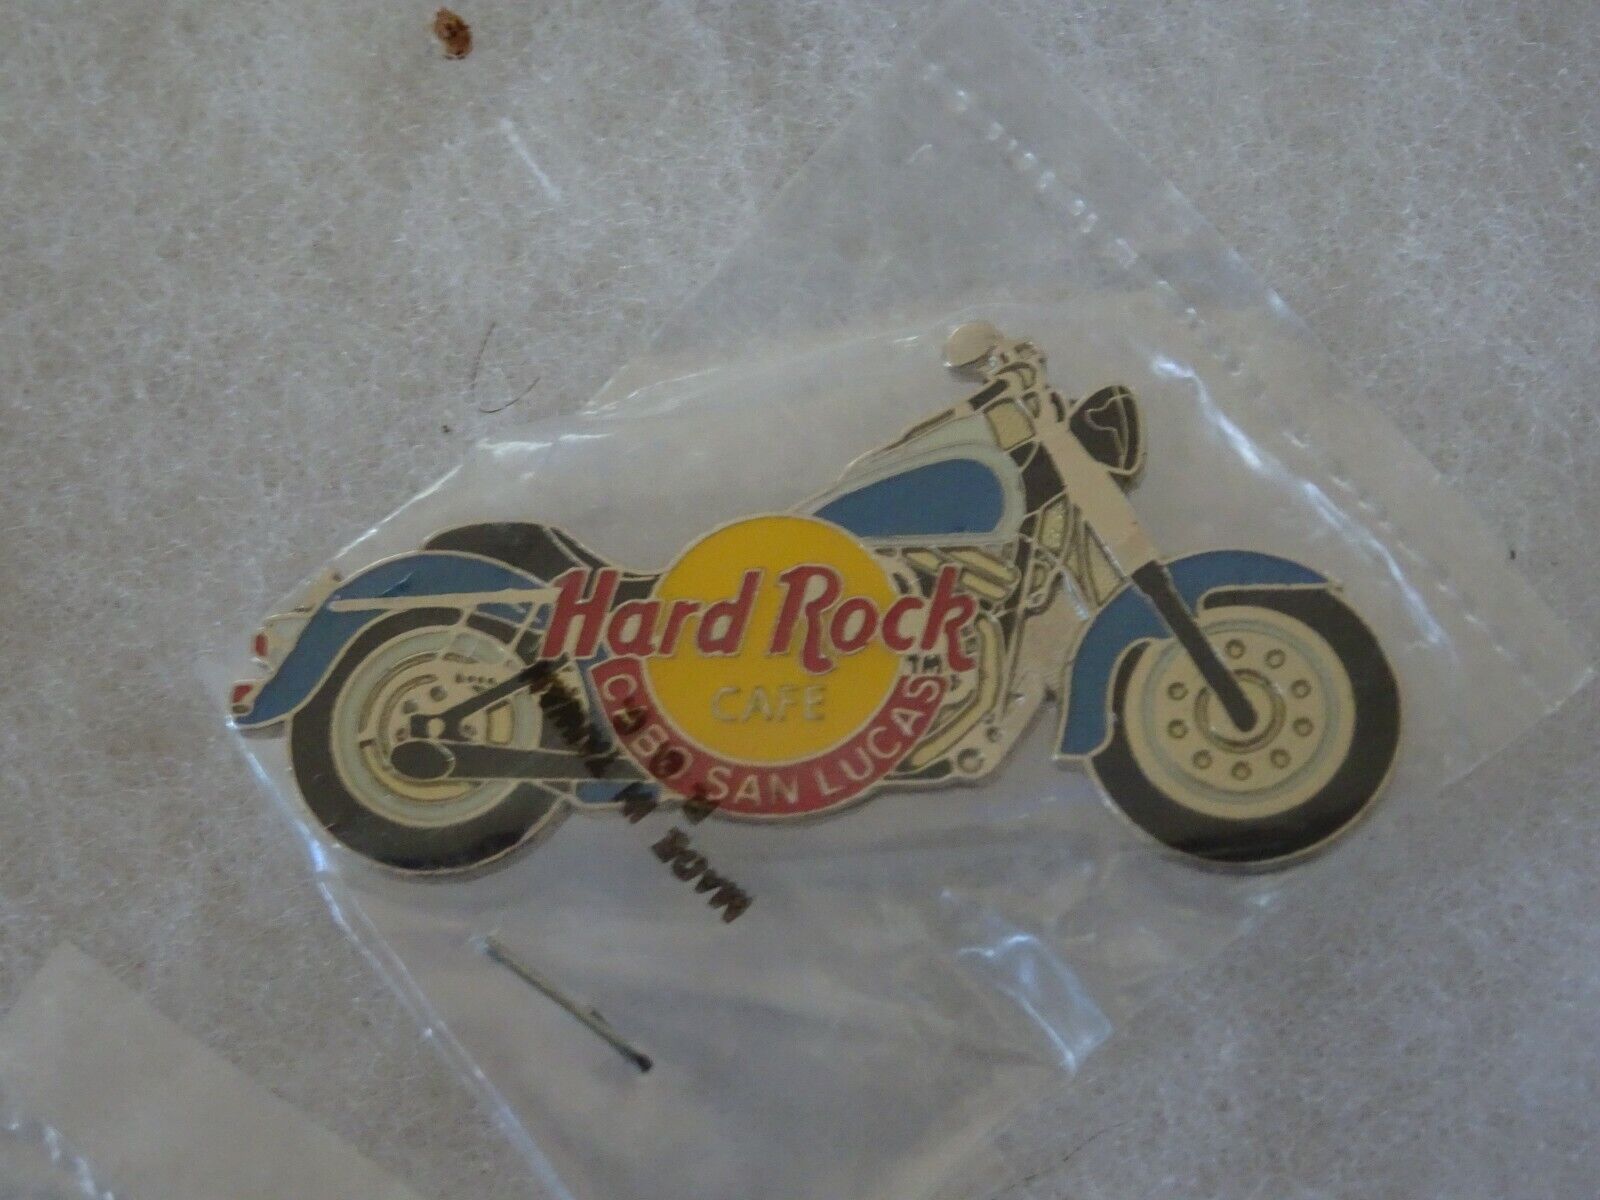 Hard Rock Cafe pin Cabo San Lucas Motorcycle Blue Fenders White and Blue Tank